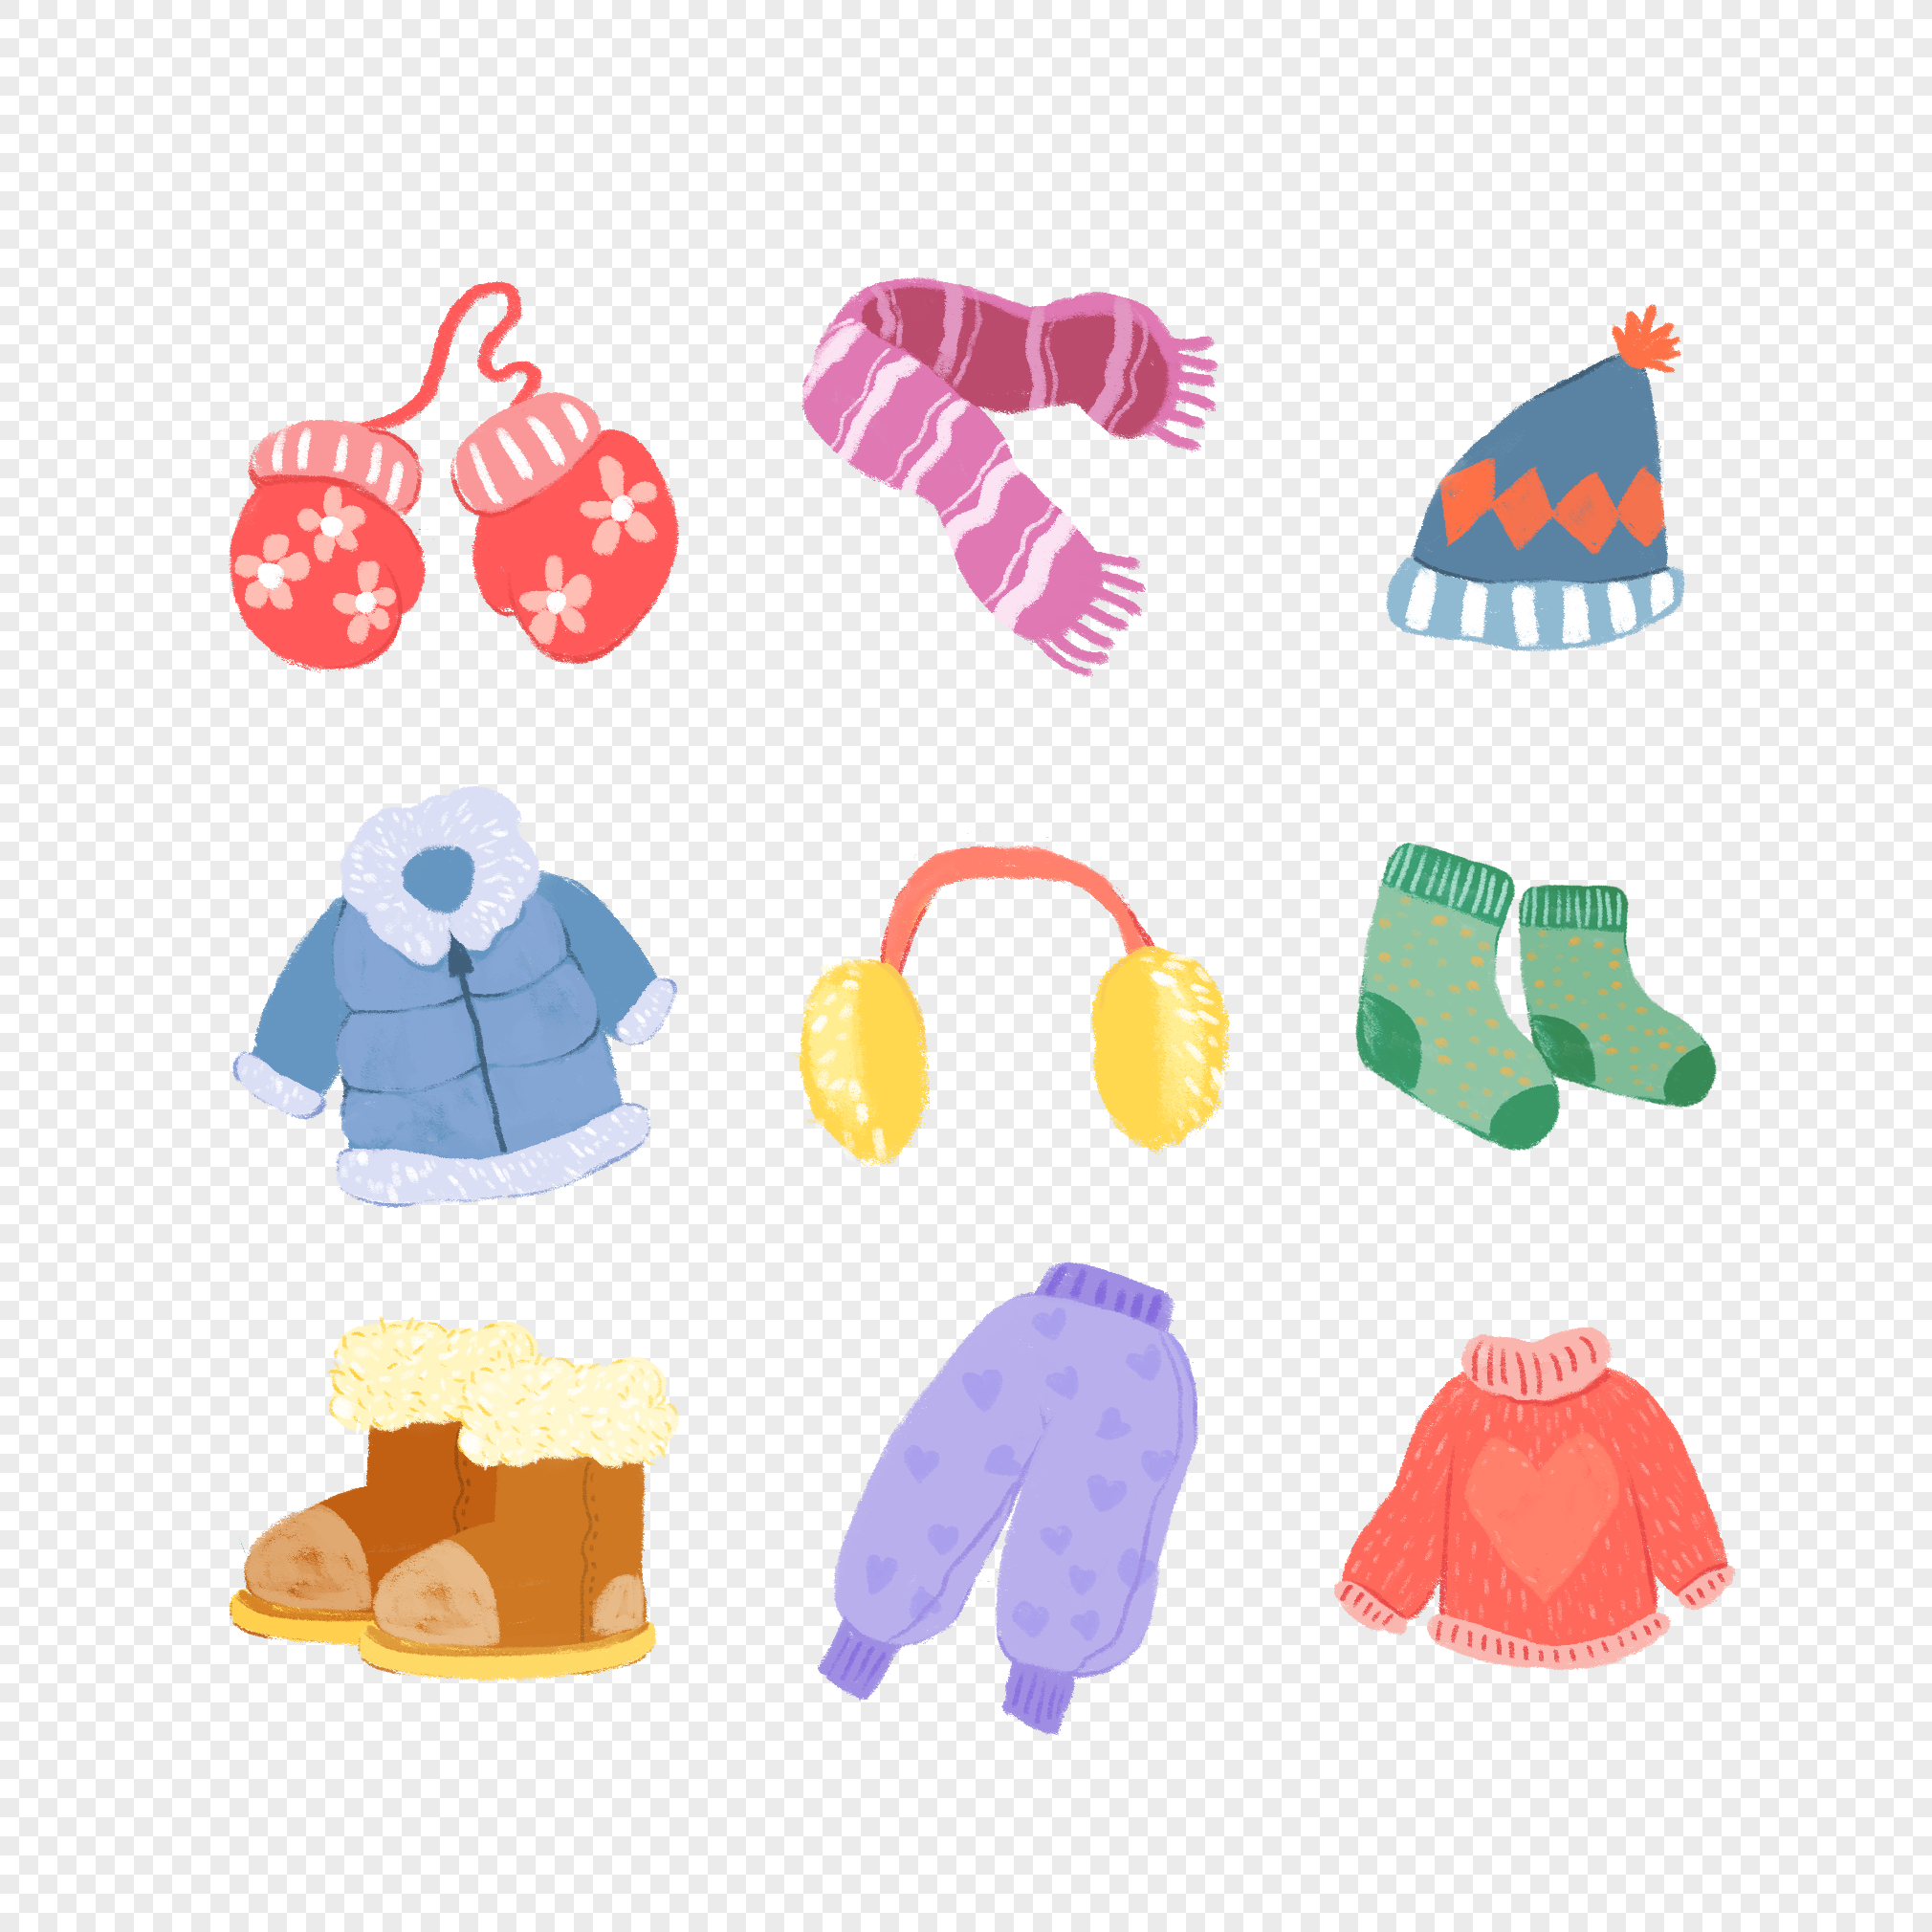 Clothing Dress, Fall and winter clothing transparent background PNG clipart